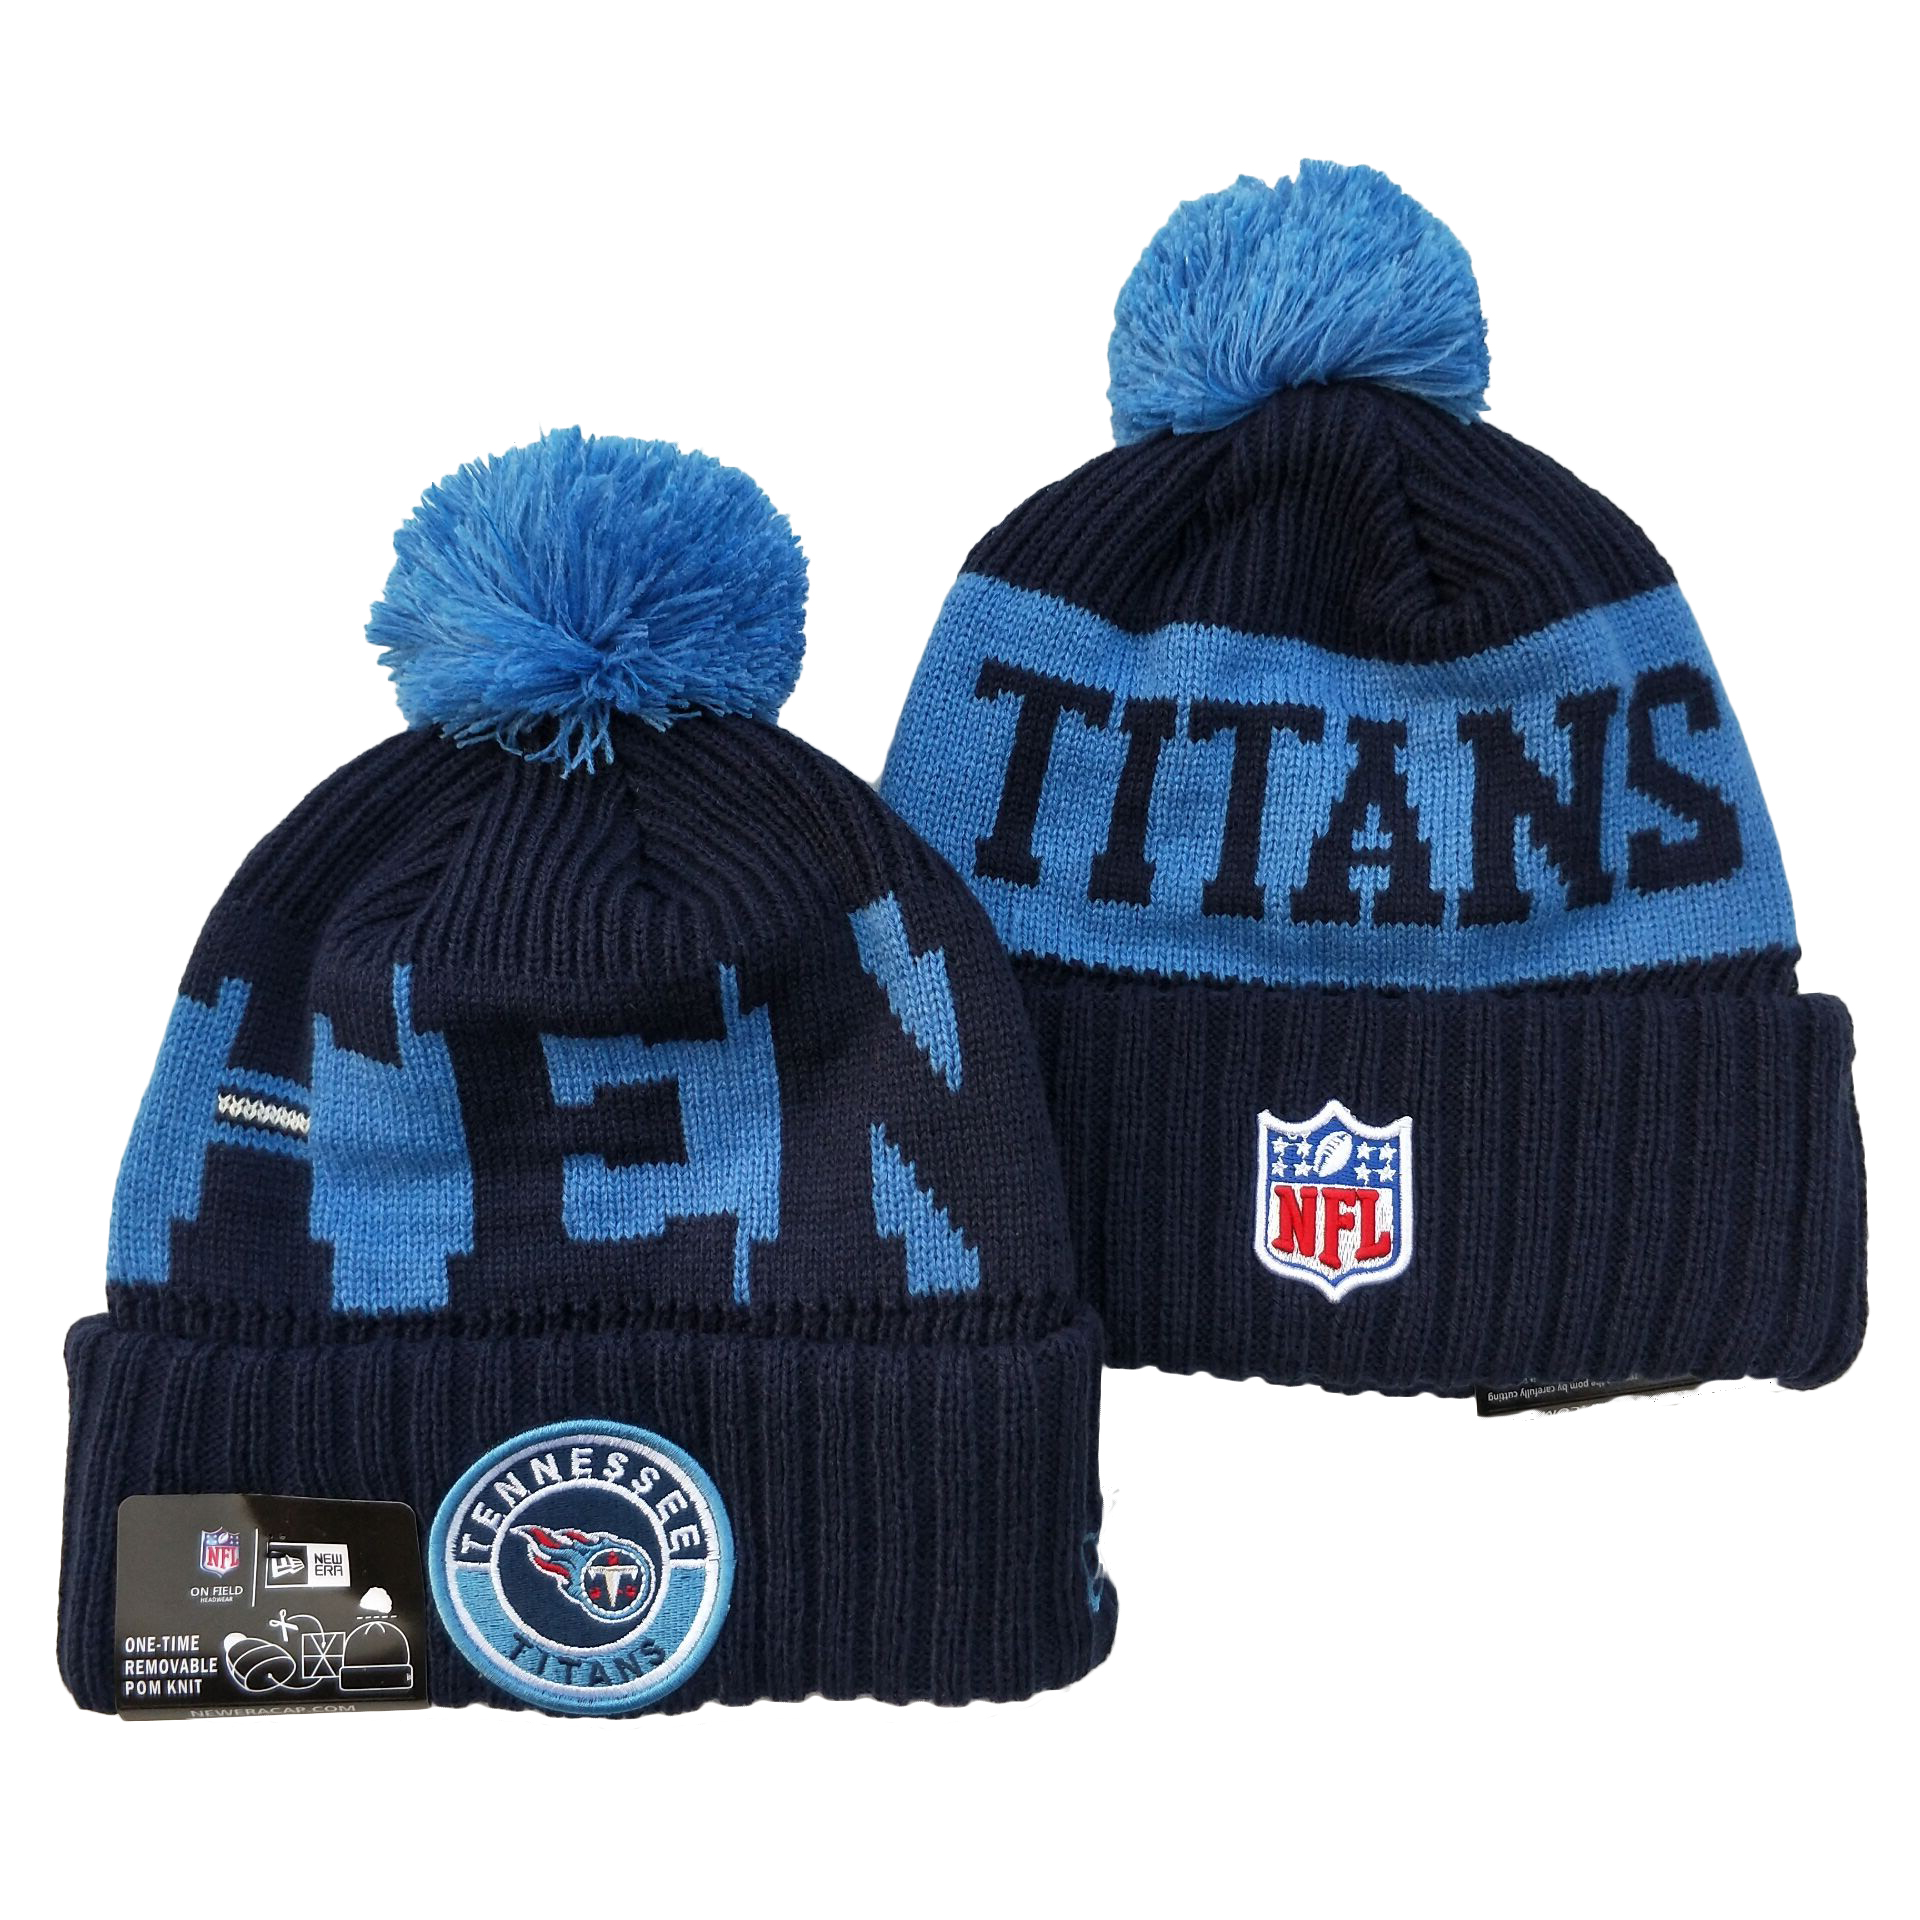 NFL Tennessee Titans Beanies Knit Hats-YD1320